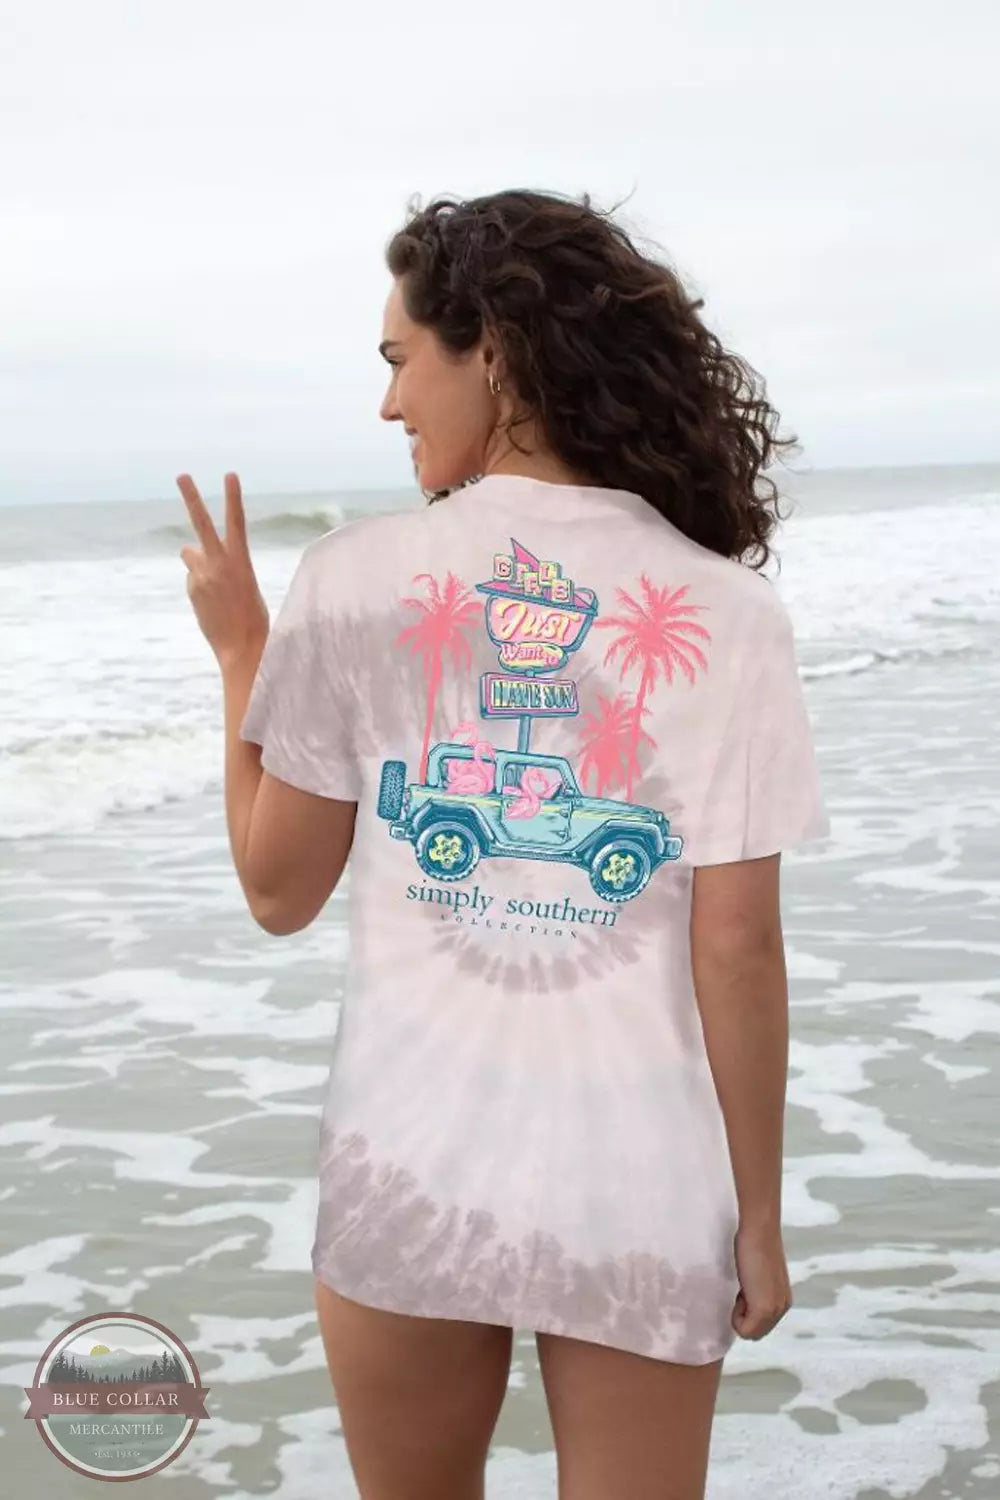 Simply Southern SS-FLAMINGO-MANTEO Girls Just Want to Have Sun T-Shirt in Manteo Tie Dye Life Back View